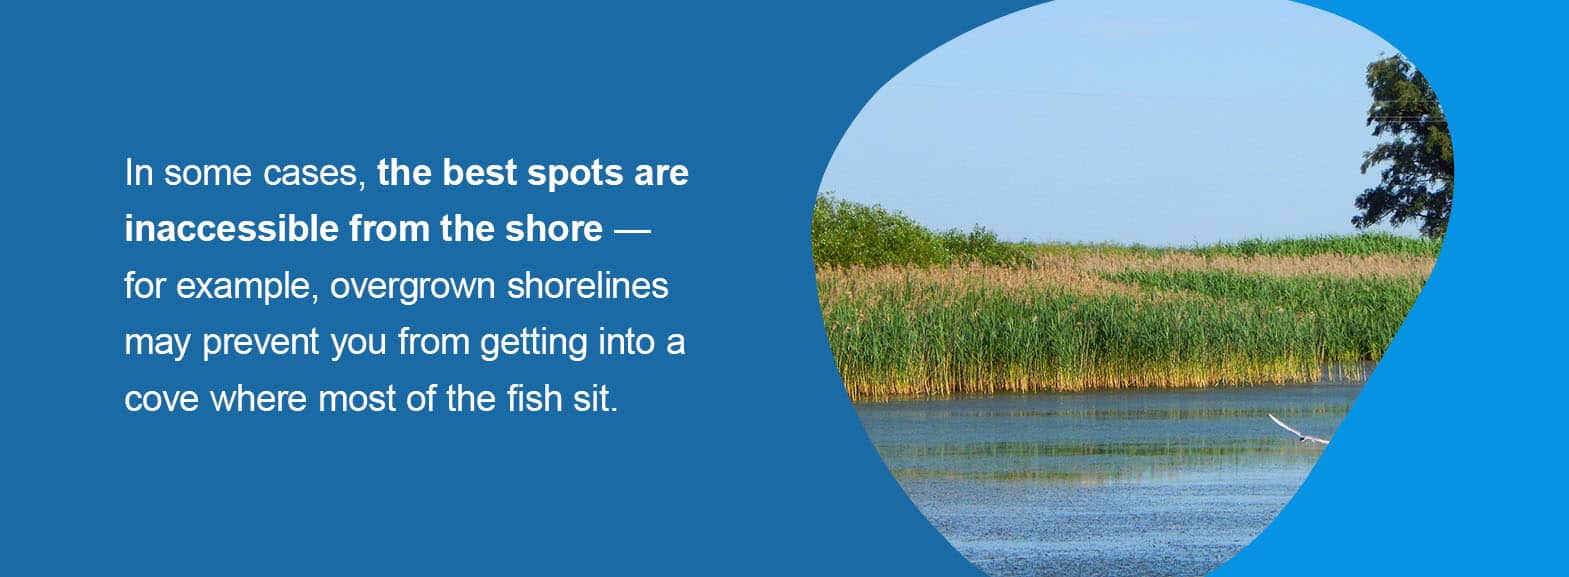 In some cases, the best spots are inaccessible from the shore — for example, overgrown shorelines may prevent you from getting into a cove where most of the fish sit.